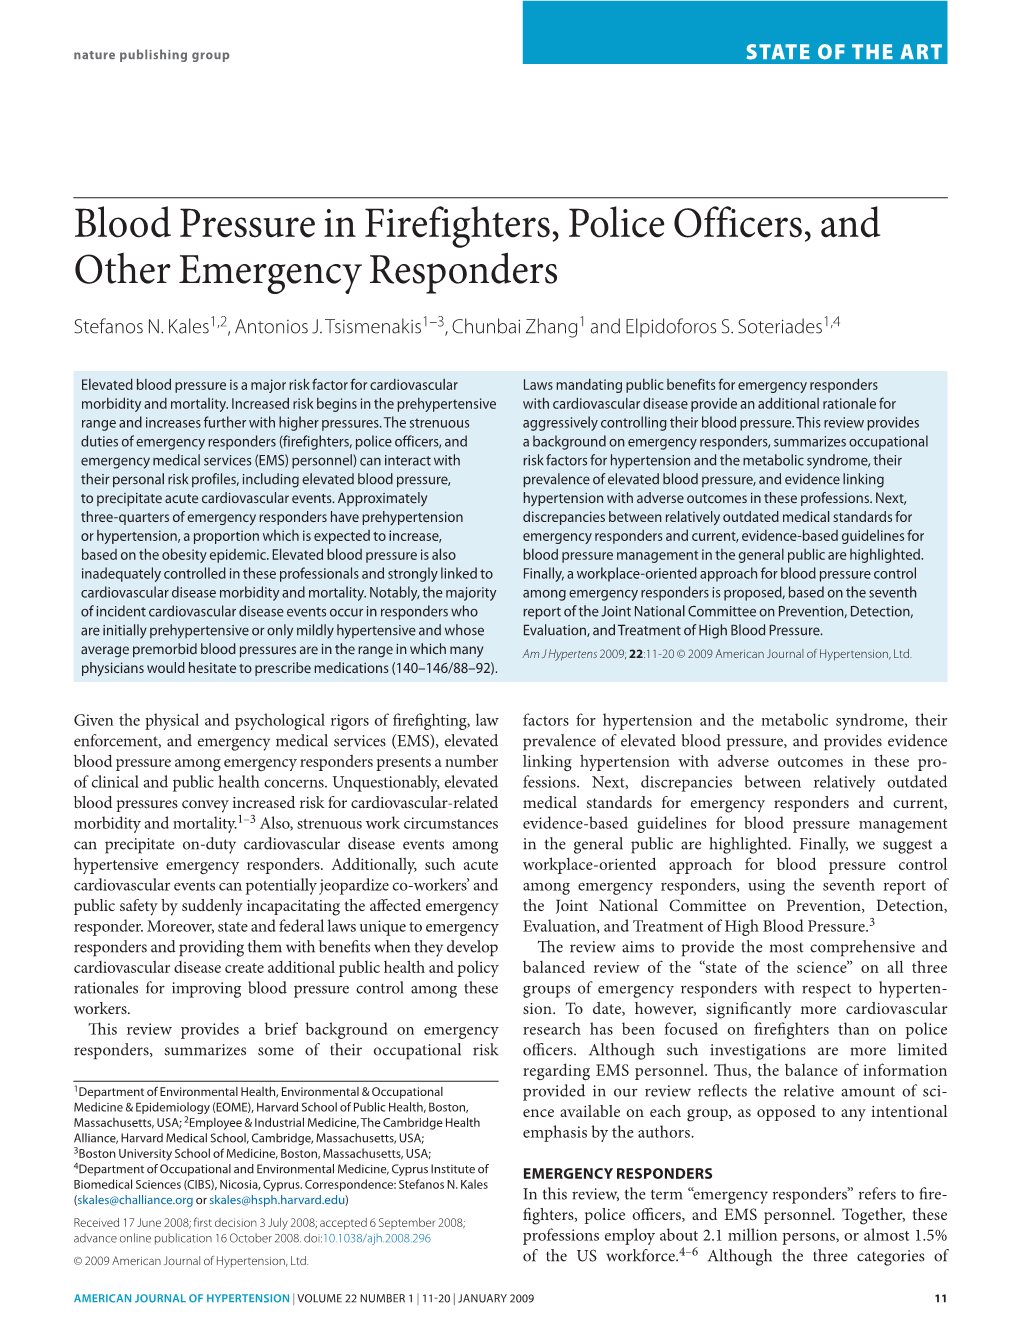 Blood Pressure in Firefighters, Police Officers, and Other Emergency Responders Stefanos N